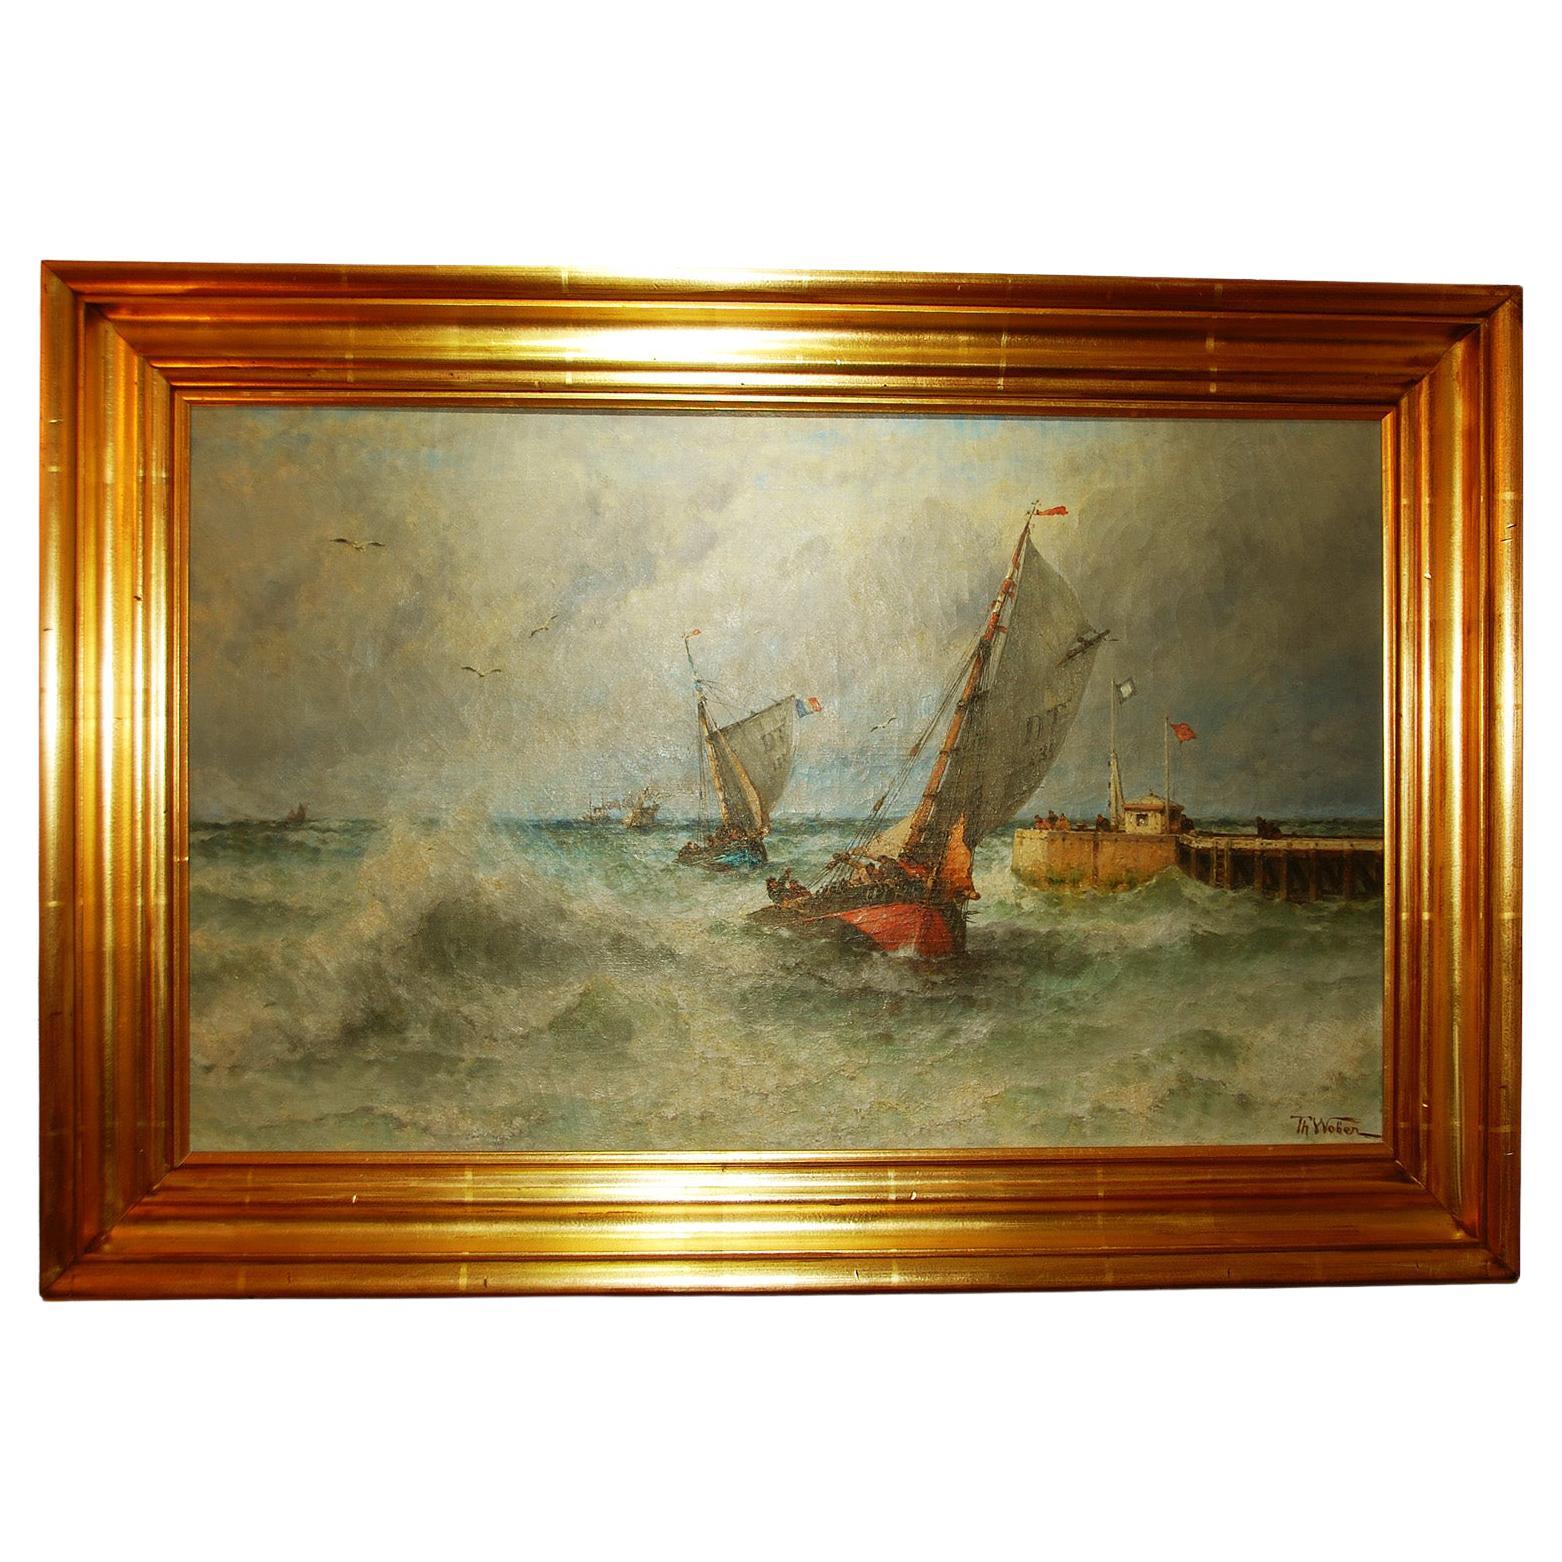 French 19th Century Theodor Weber Oil Painting "Fishing Boats Coming Home"